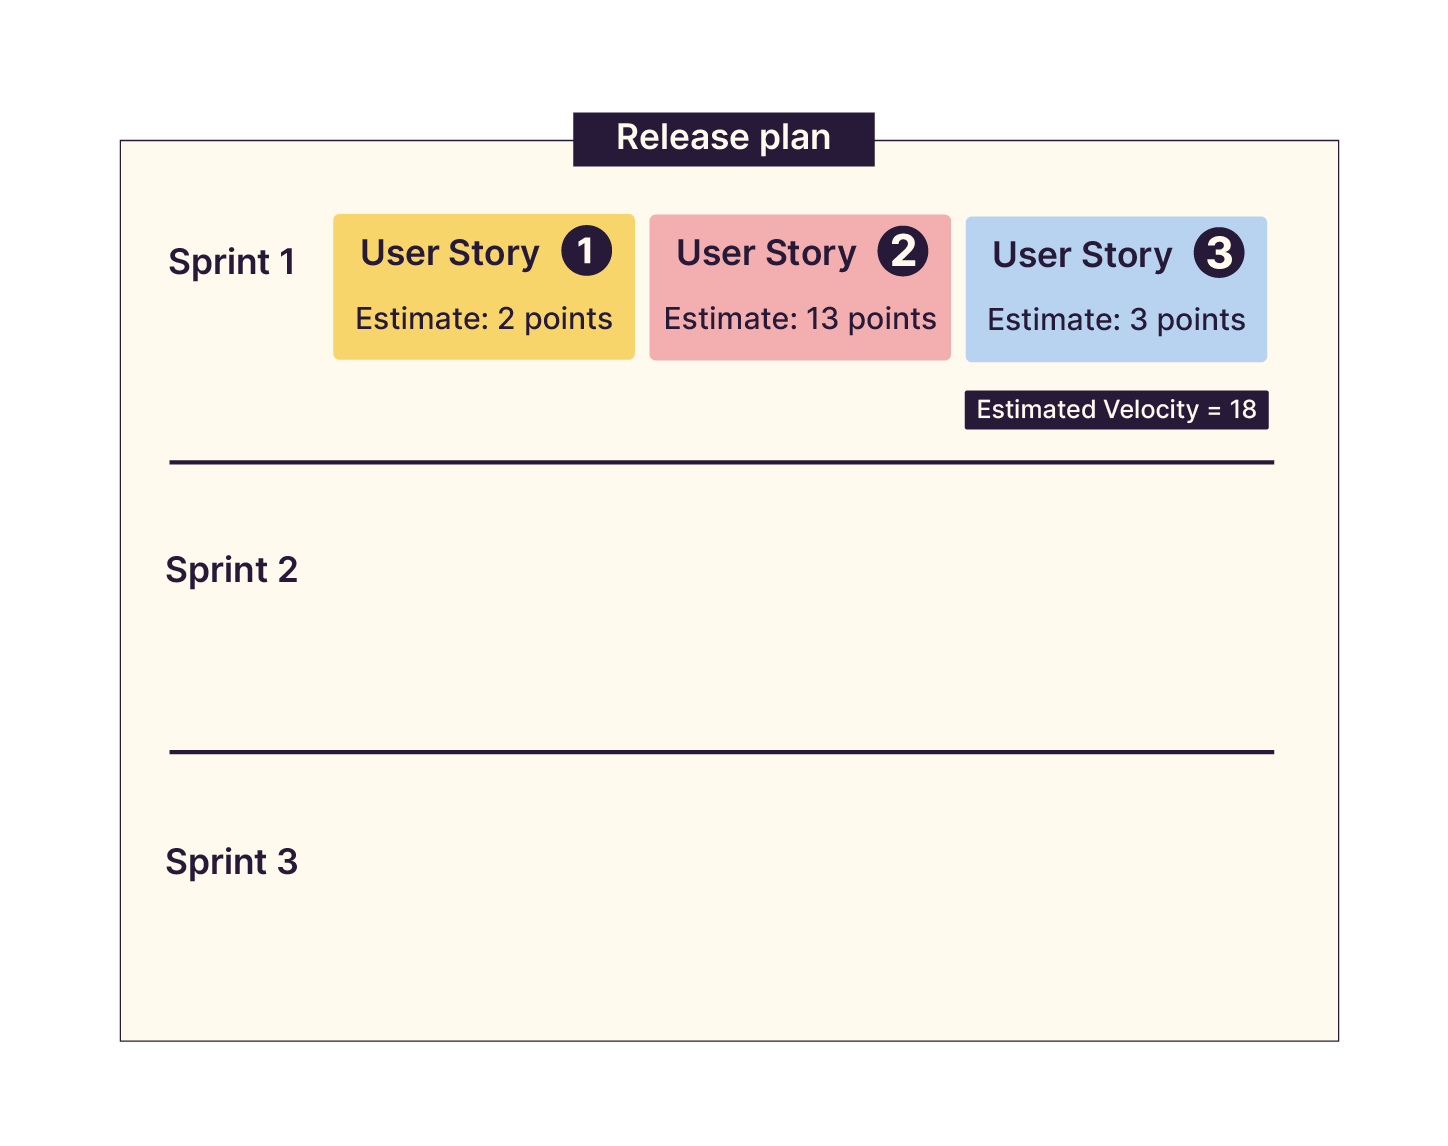 Three User Stories are grouped in a Sprint. Their Story Points add up to 18 points.